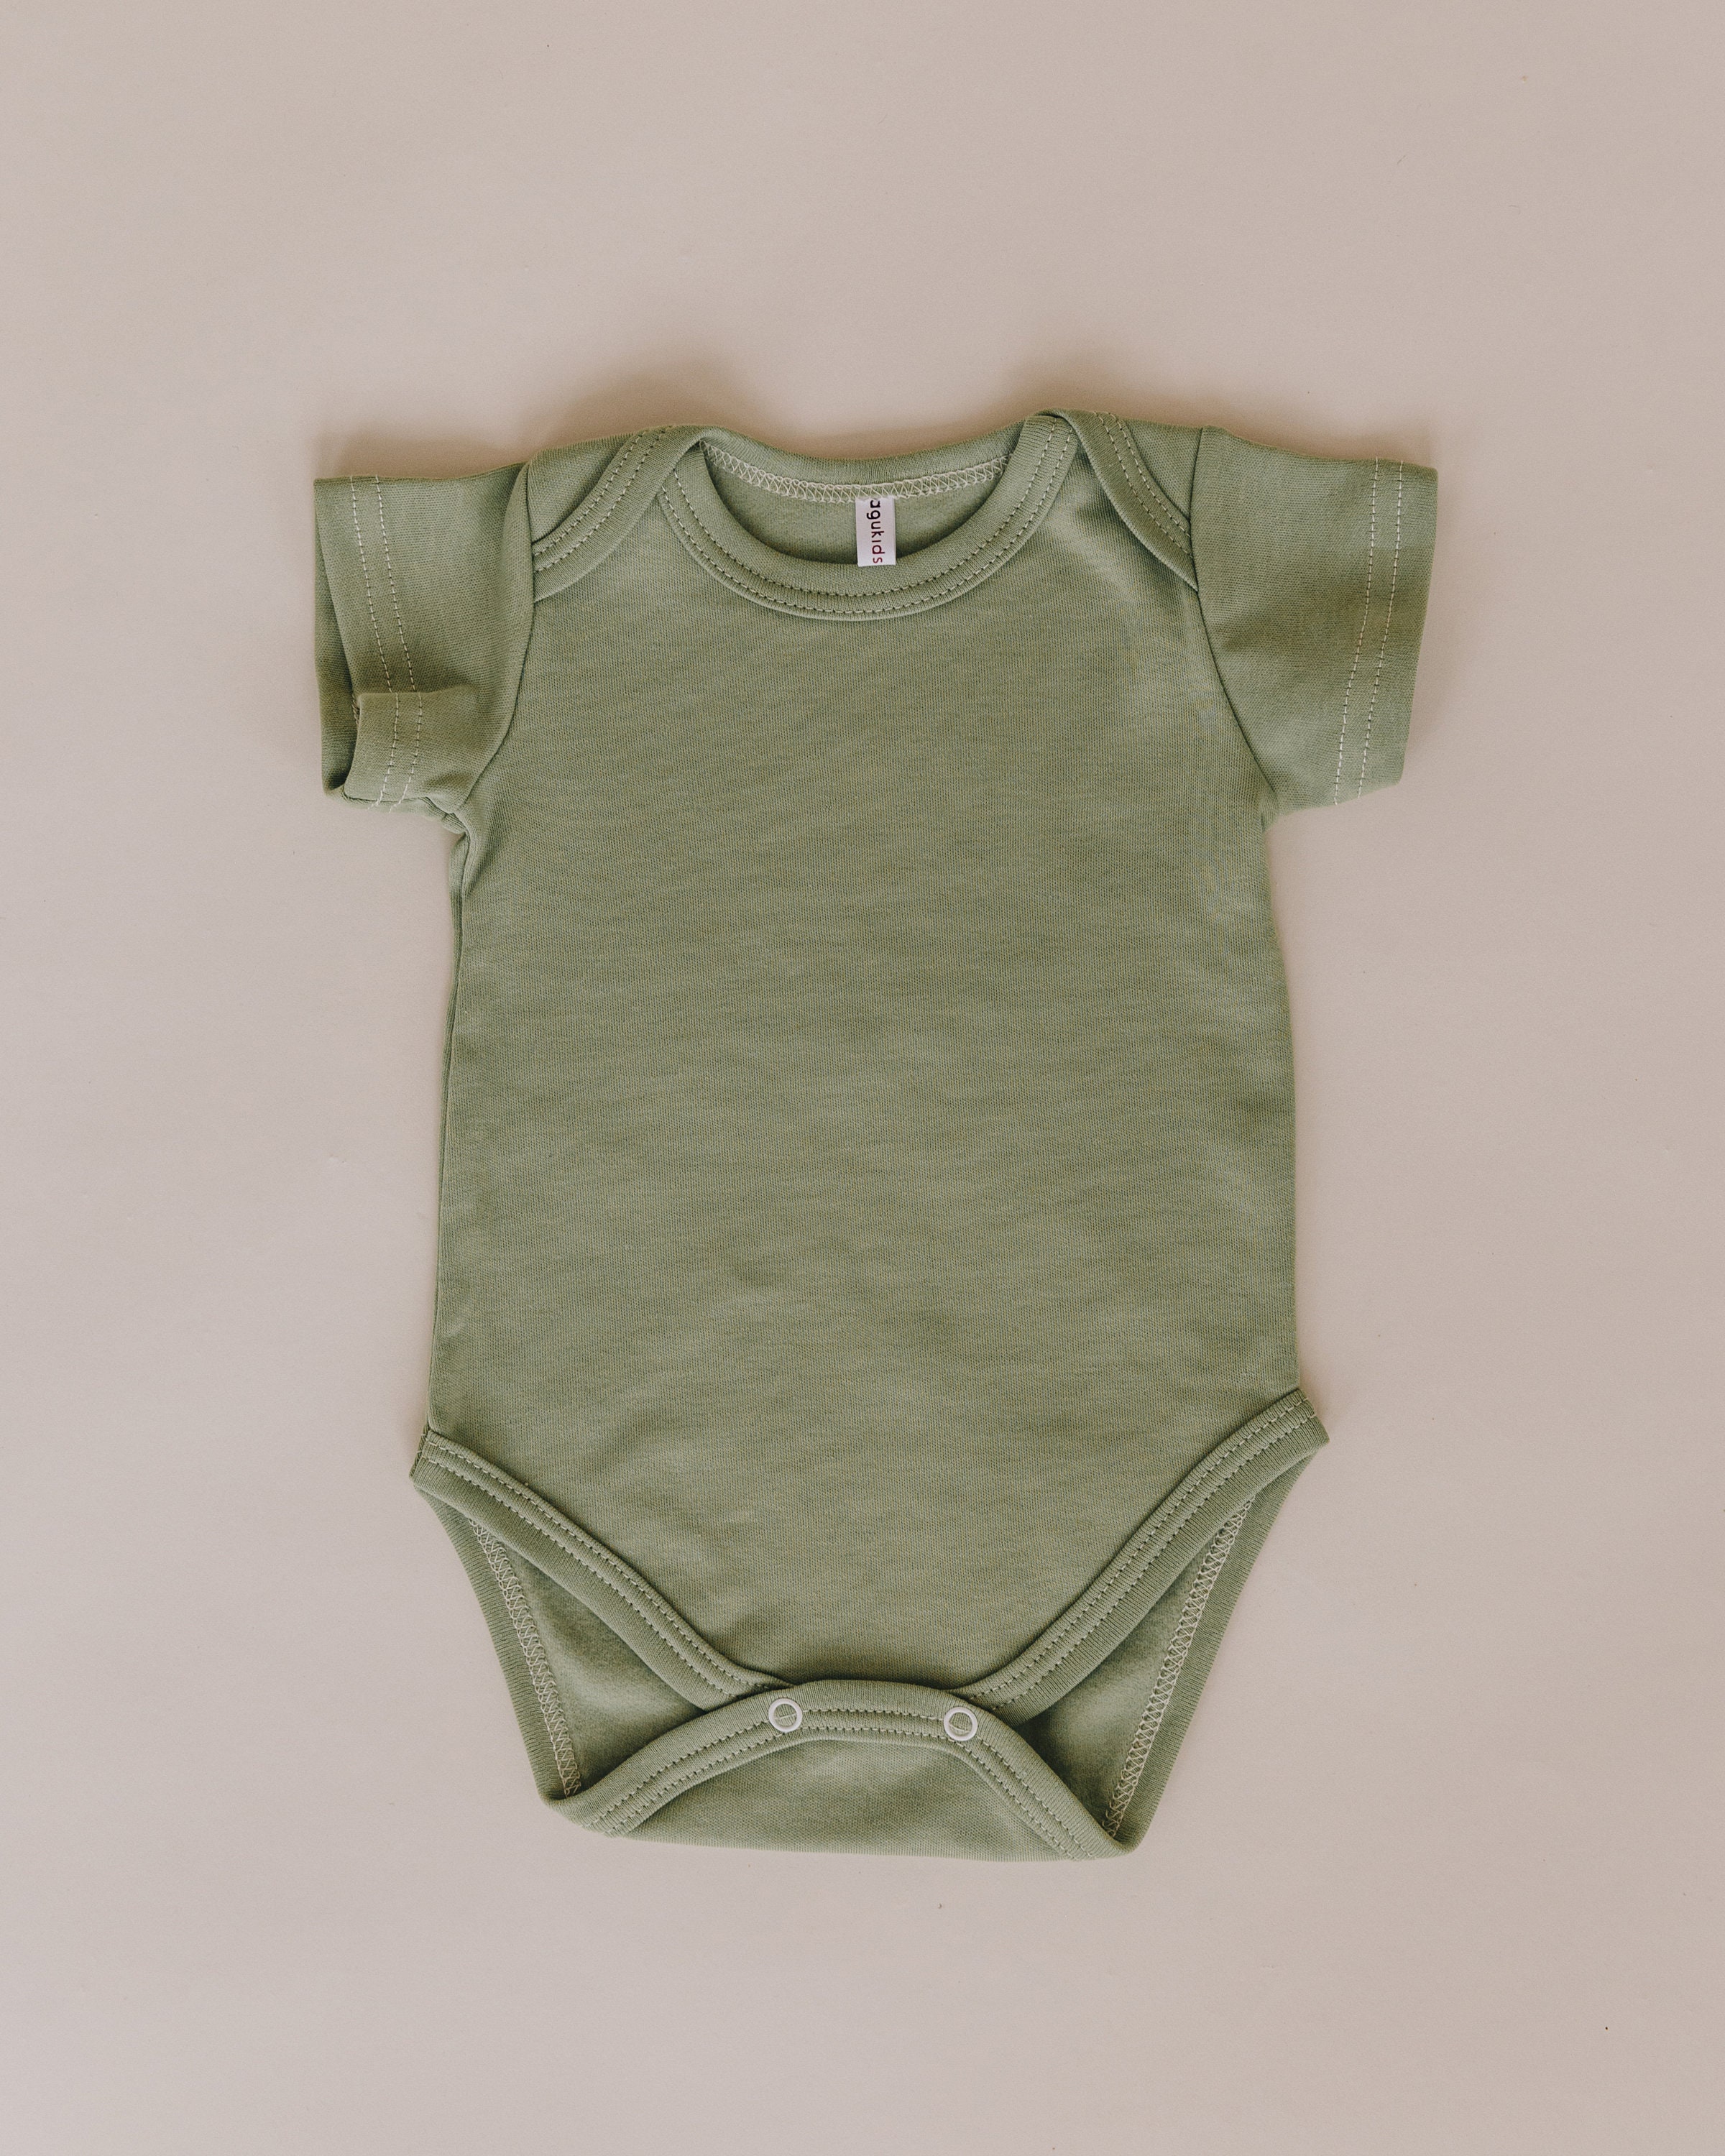 Baby Bodysuit Short Sleeves Neutral Colors, Organic Cotton Baby Clothes,  Onesie for Babies, Gender Neutral Outfit for a Baby NB 3M 6M 9M 12M 